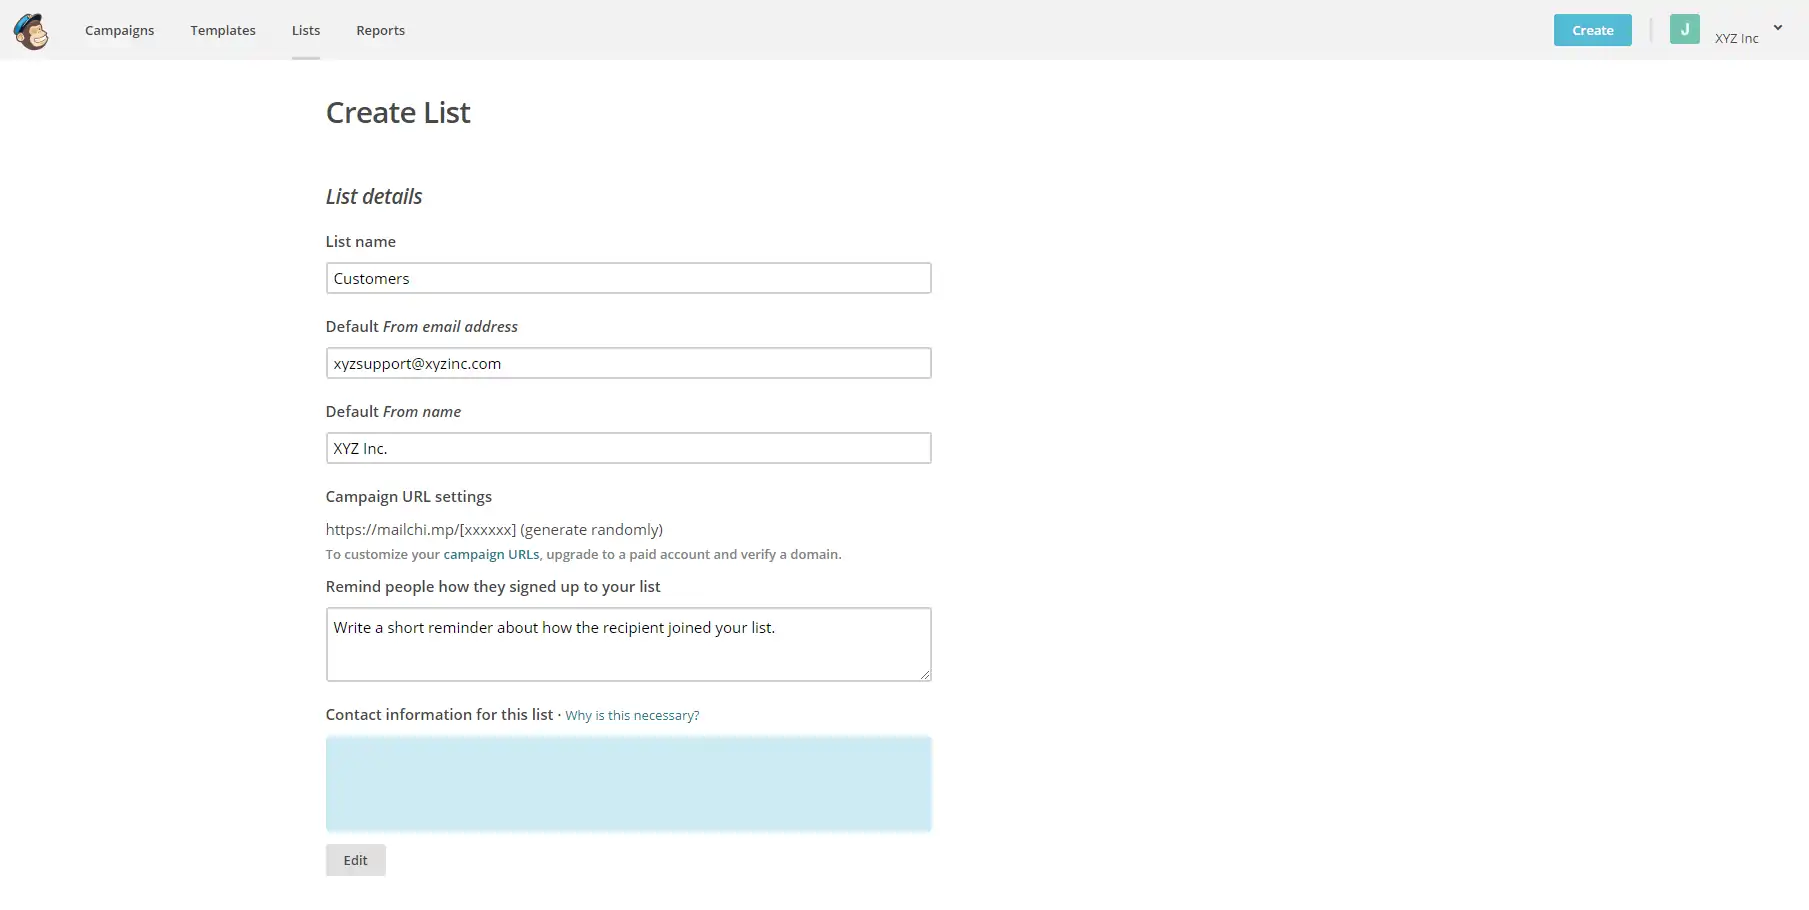 Getting Started With Mailchimp - Understanding and Using Mailchimp Email Marketing Automation 2